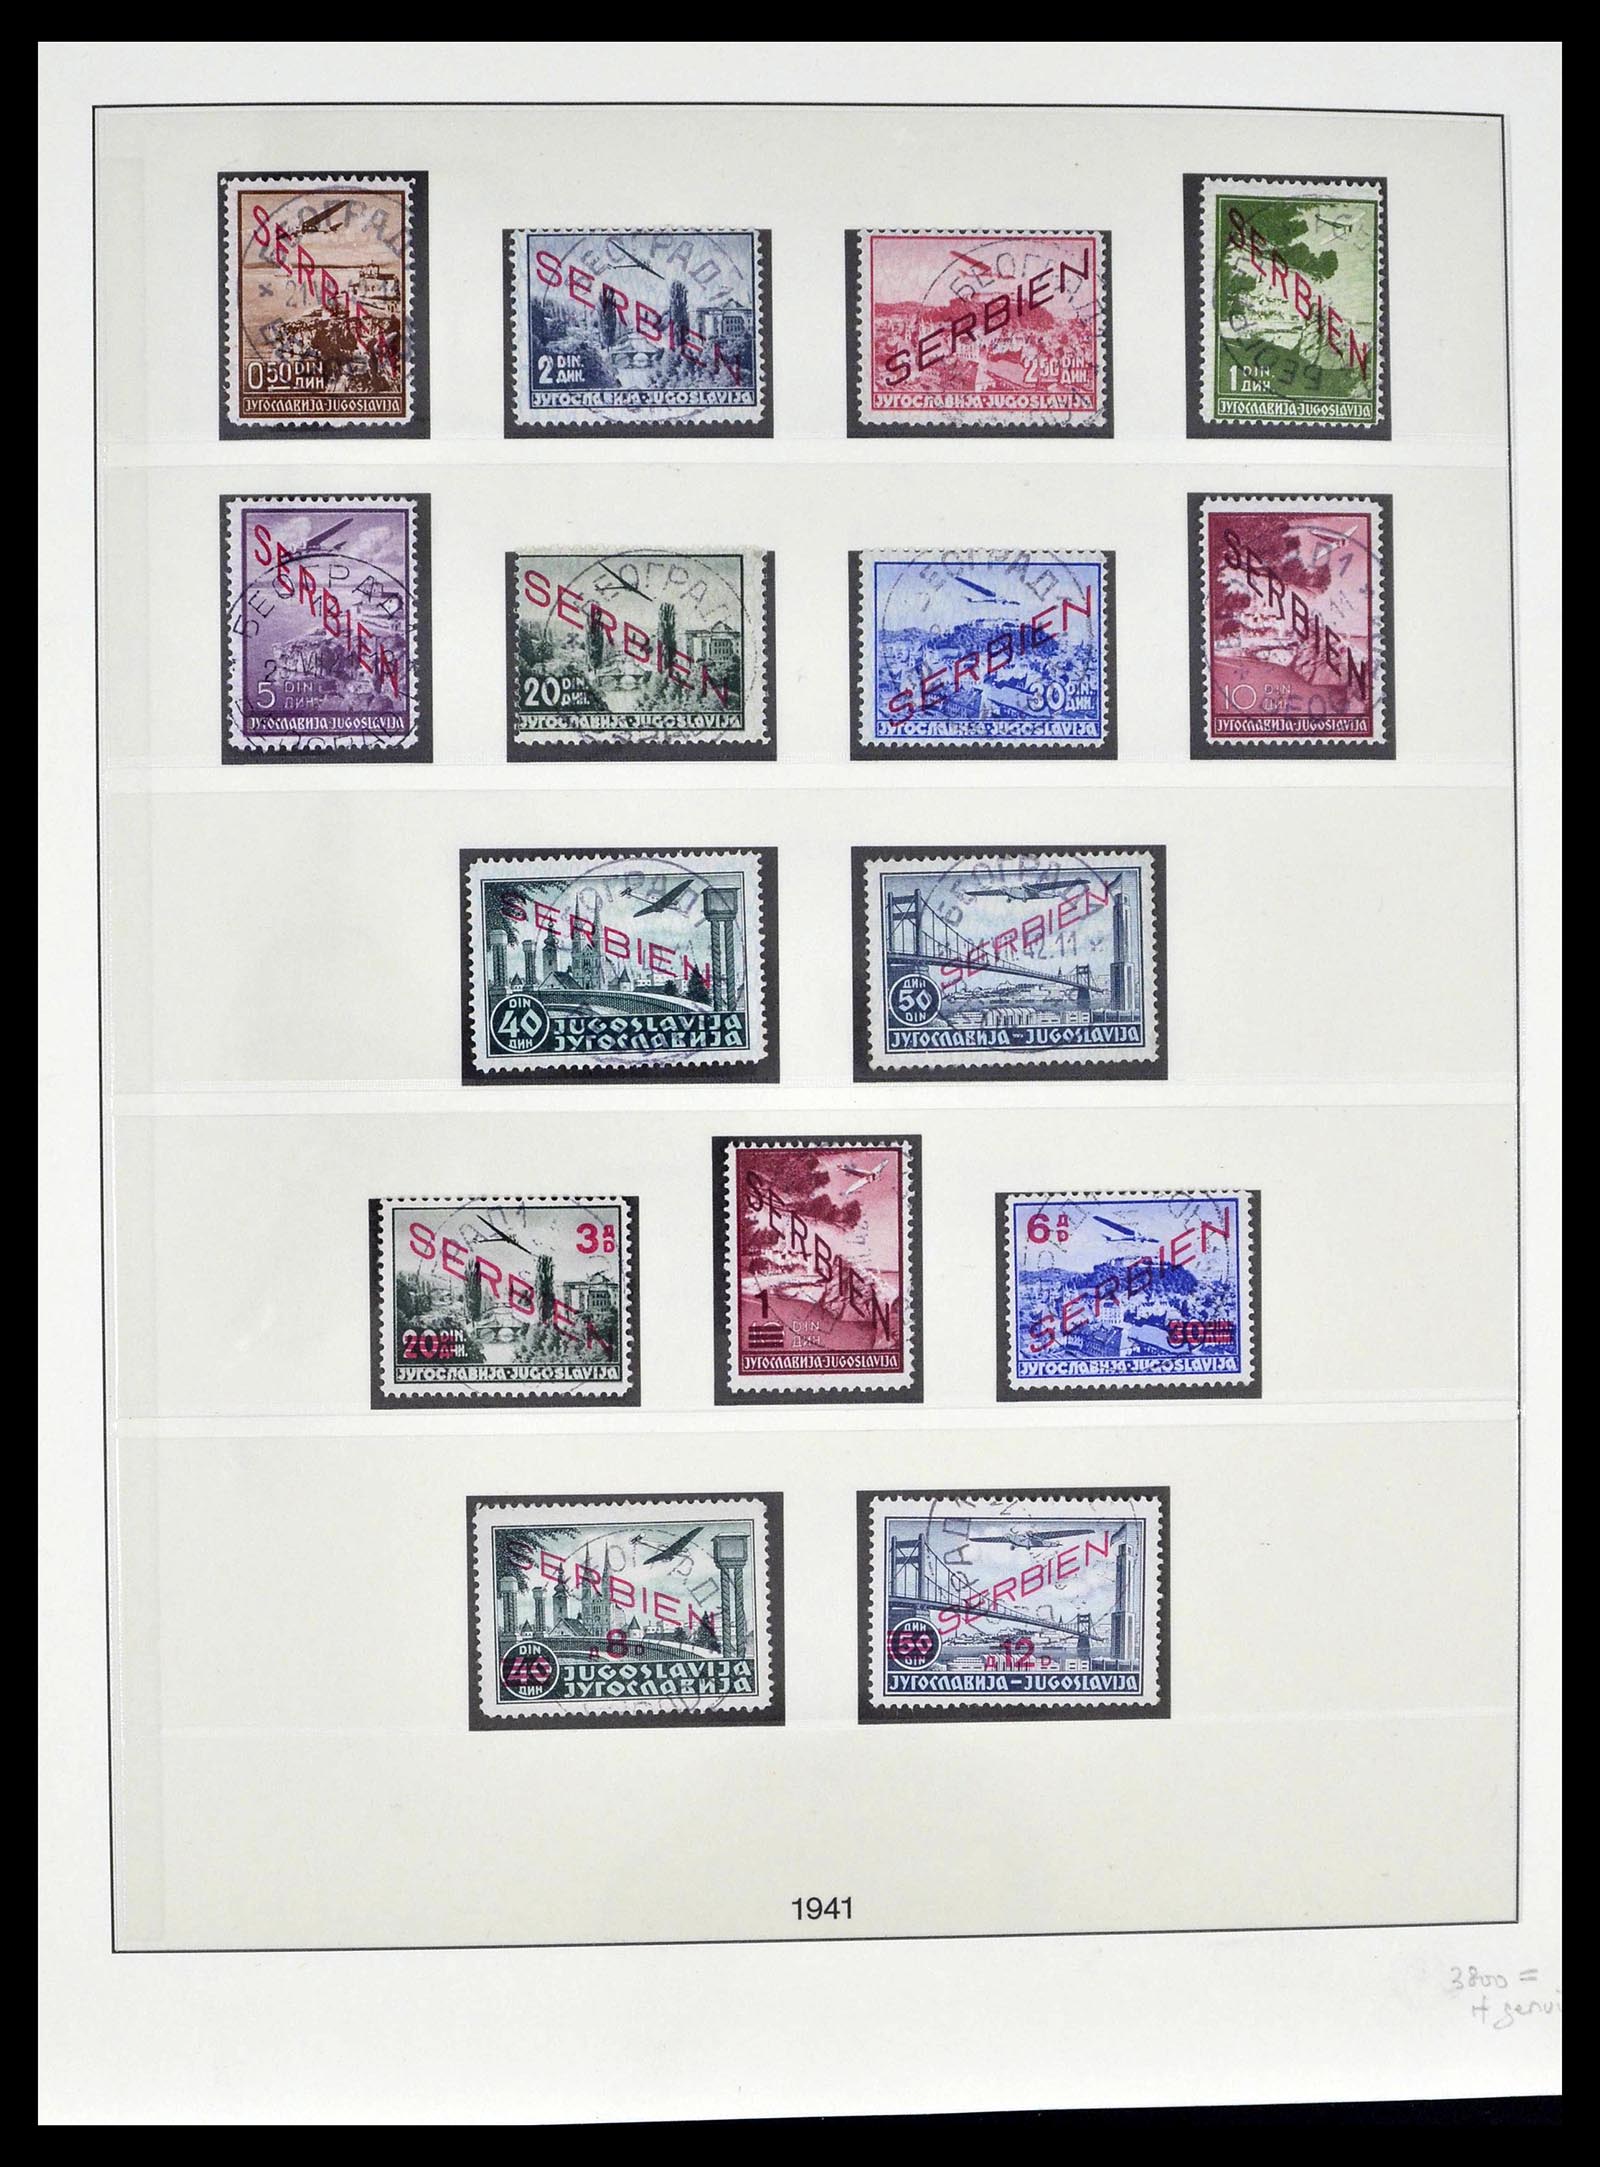 39396 0012 - Stamp collection 39396 German occupation WW II 1939-1945.